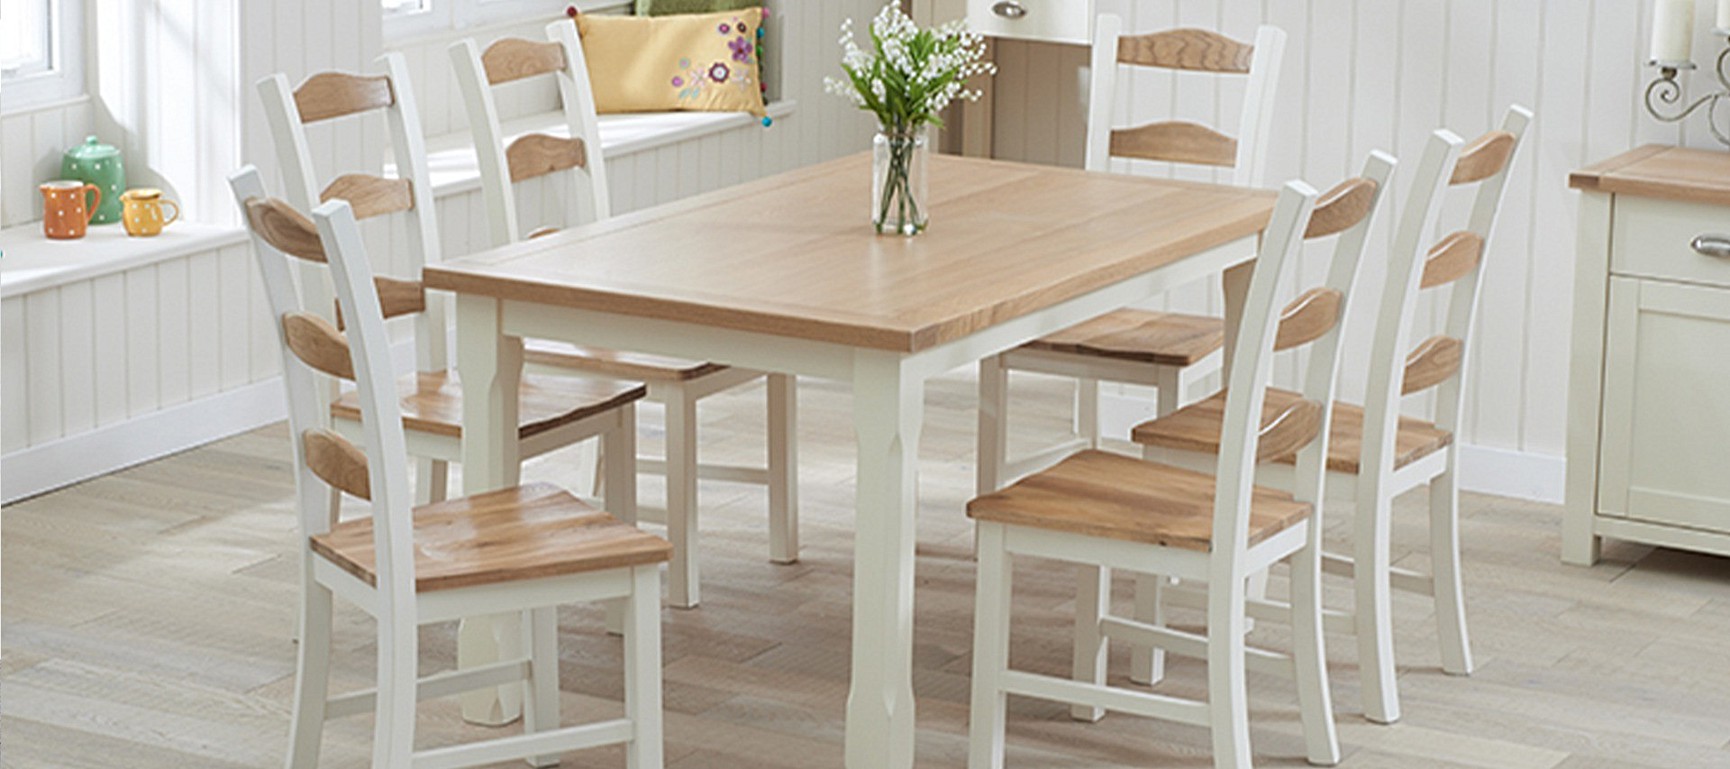 Somerset 180cm Oak and Cream Extending Dining Table with Chairs